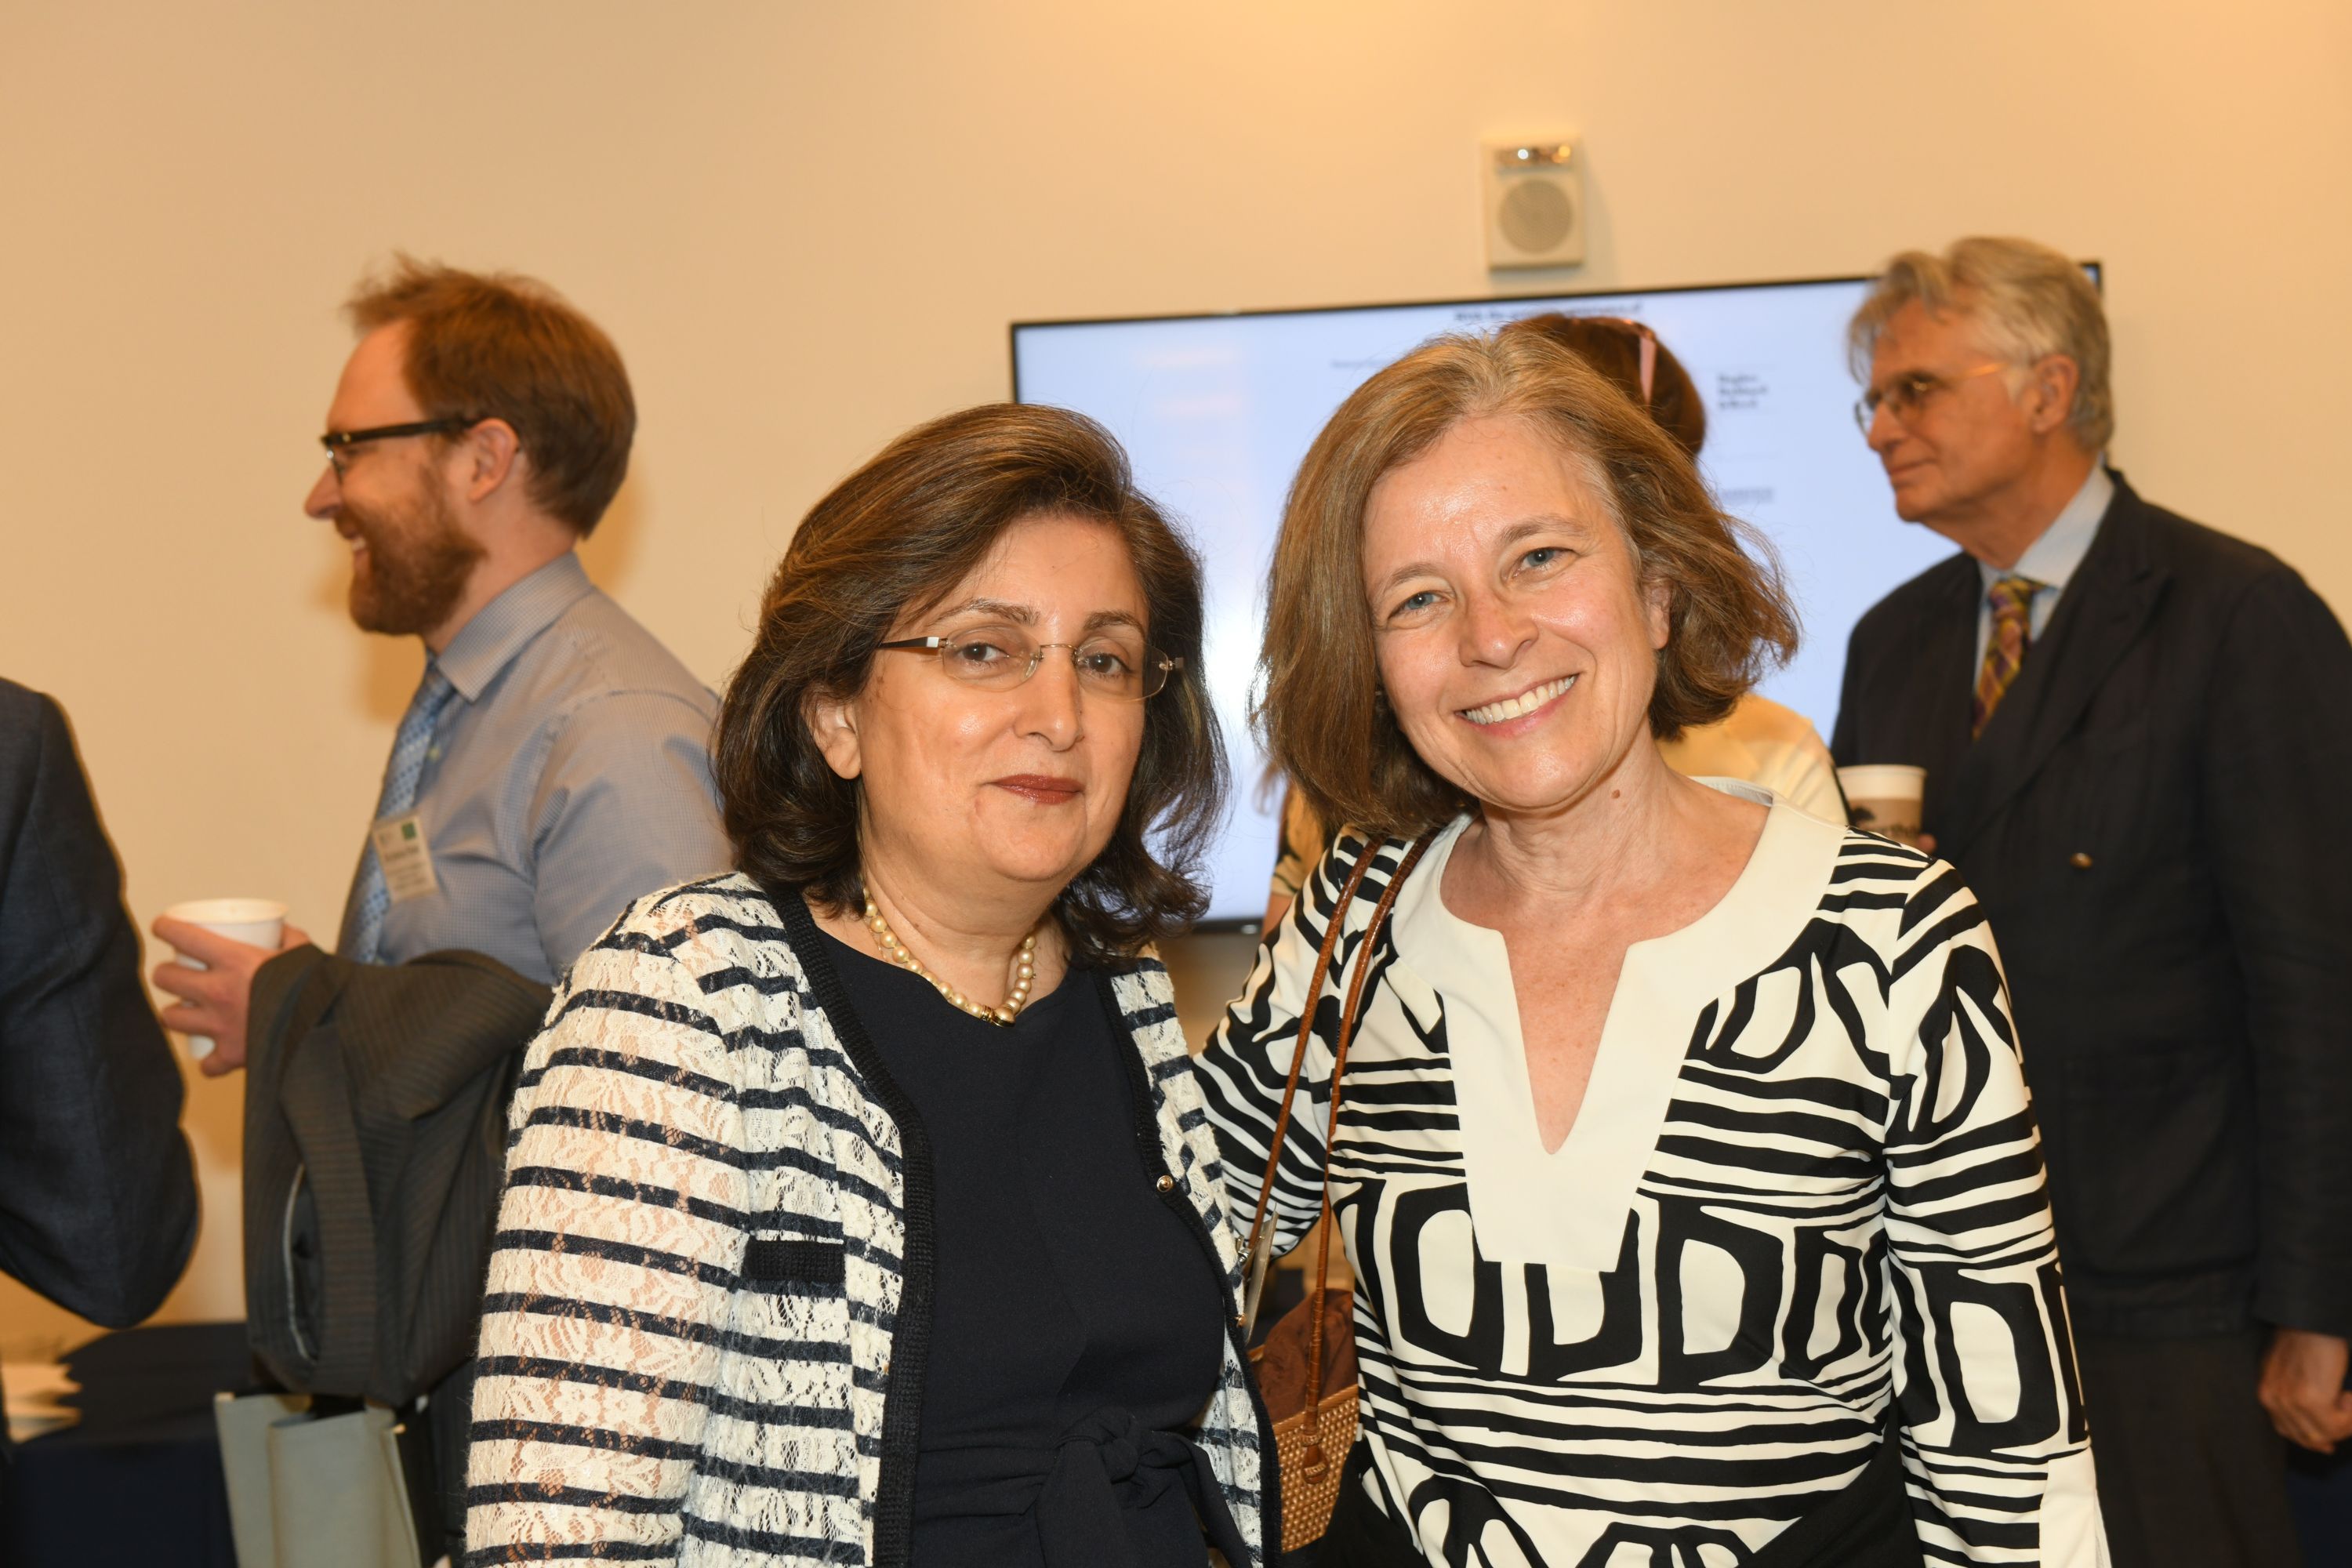 Left to right: Padideh Ala’i, Director of International and Comparative Legal Studies at AUWCL; Sarah Raskin, former United States Deputy Secretary of the Treasury.